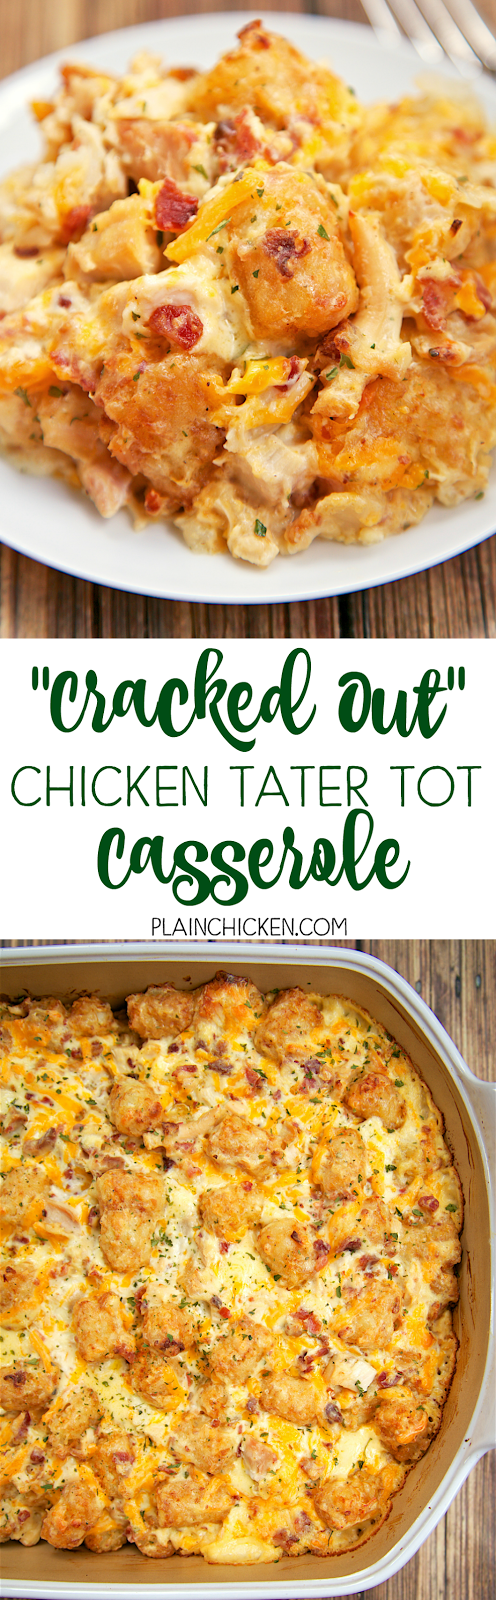 “Cracked Out” Chicken Tater Tot Casserole – You must make this ASAP! It is crazy good. Chicken, cheddar, bacon, ranch and tater